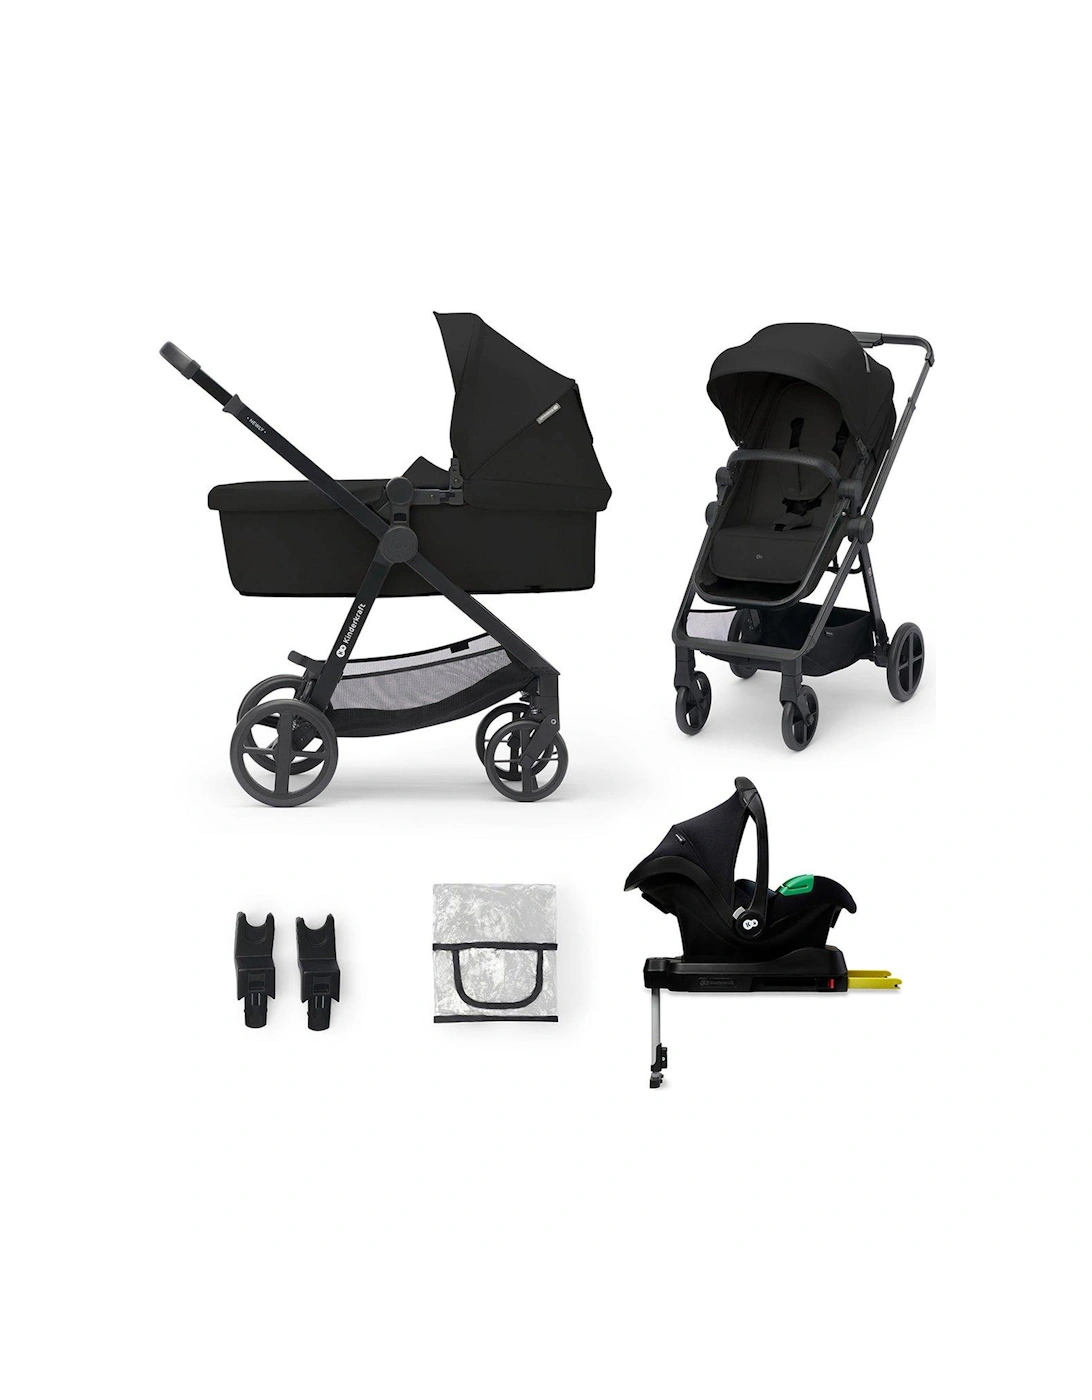 4-in-1 Travel System NEWLY (with MINK PRO i-size car seat and an ISOFIX base) - Black, 3 of 2